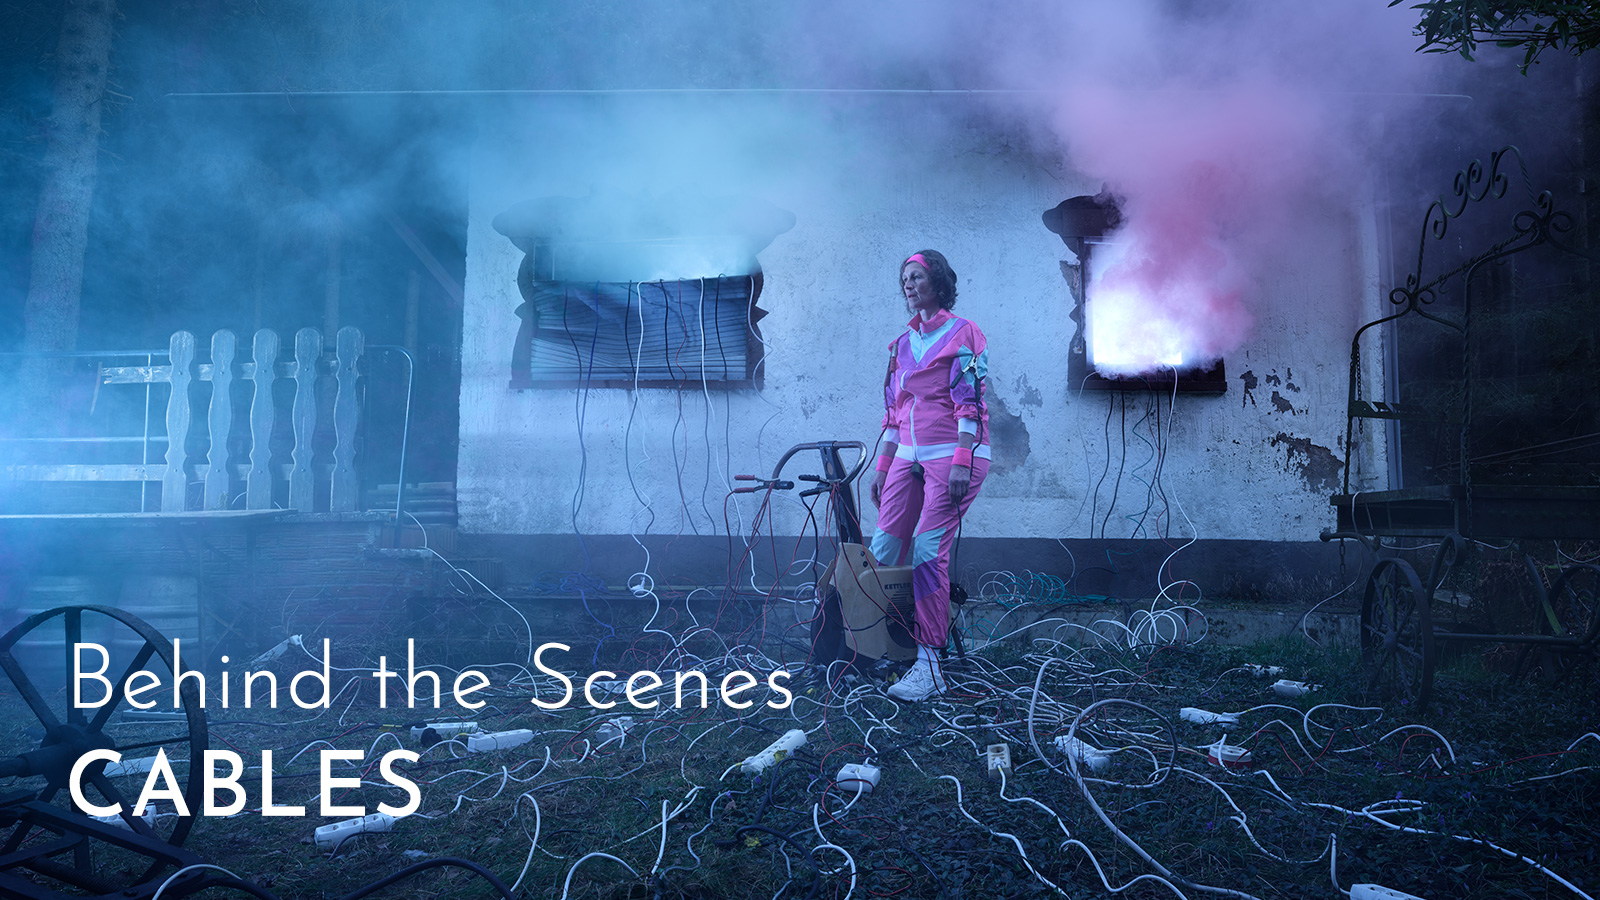 Seb Agnew | Cables – Behind the Scenes